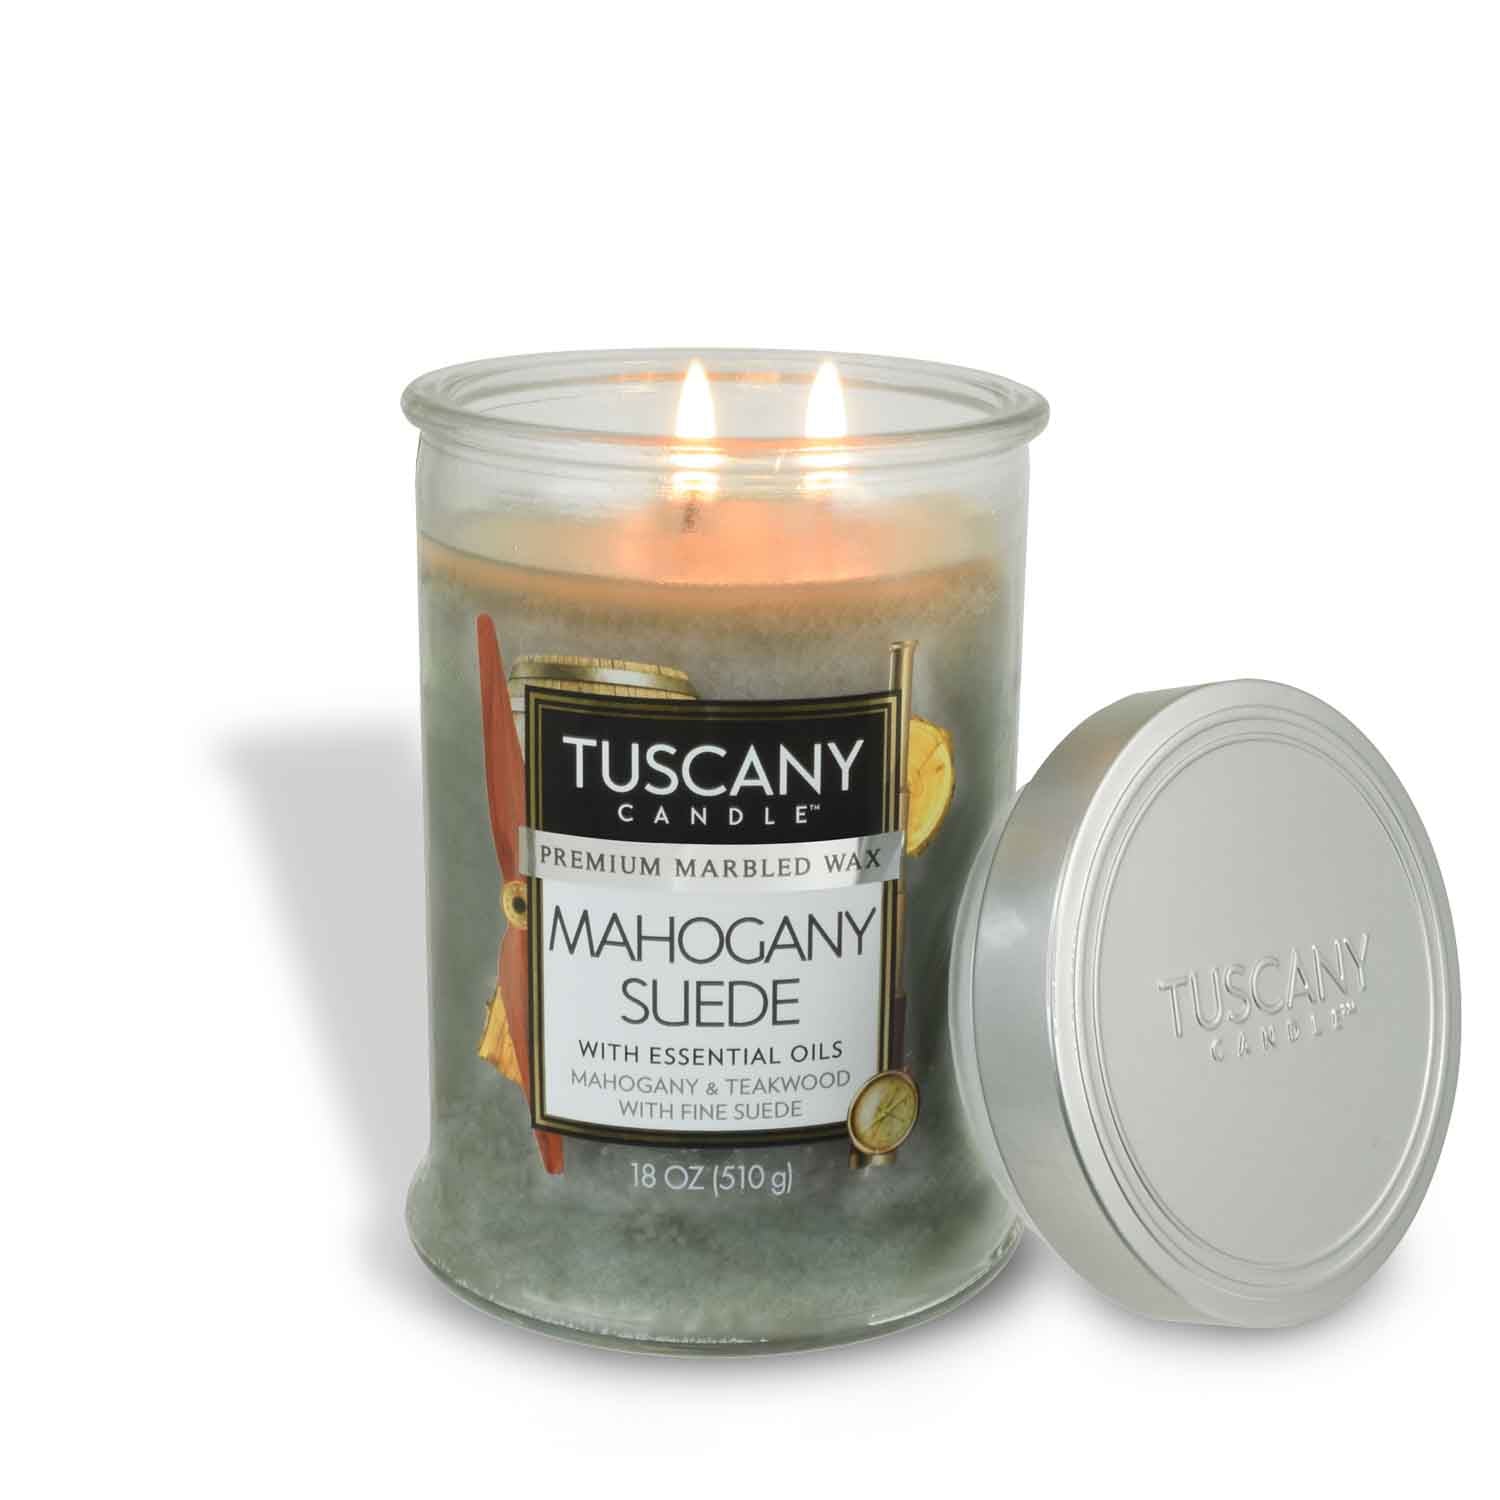 Mahogany Suede is a popular manly scented candle fragrance